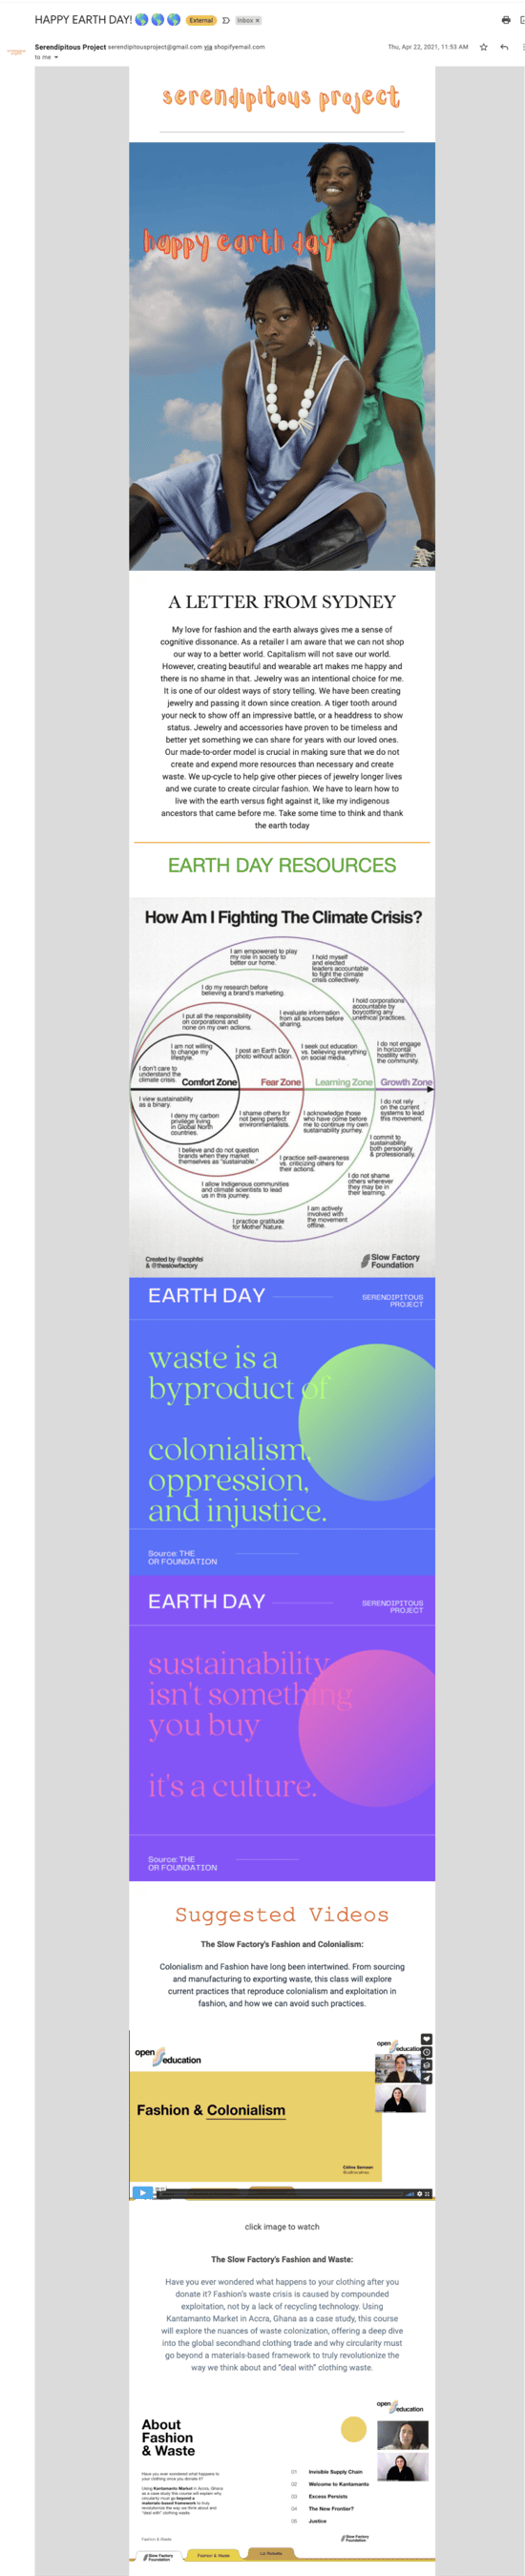 Serendipitous Project Earth Day email example